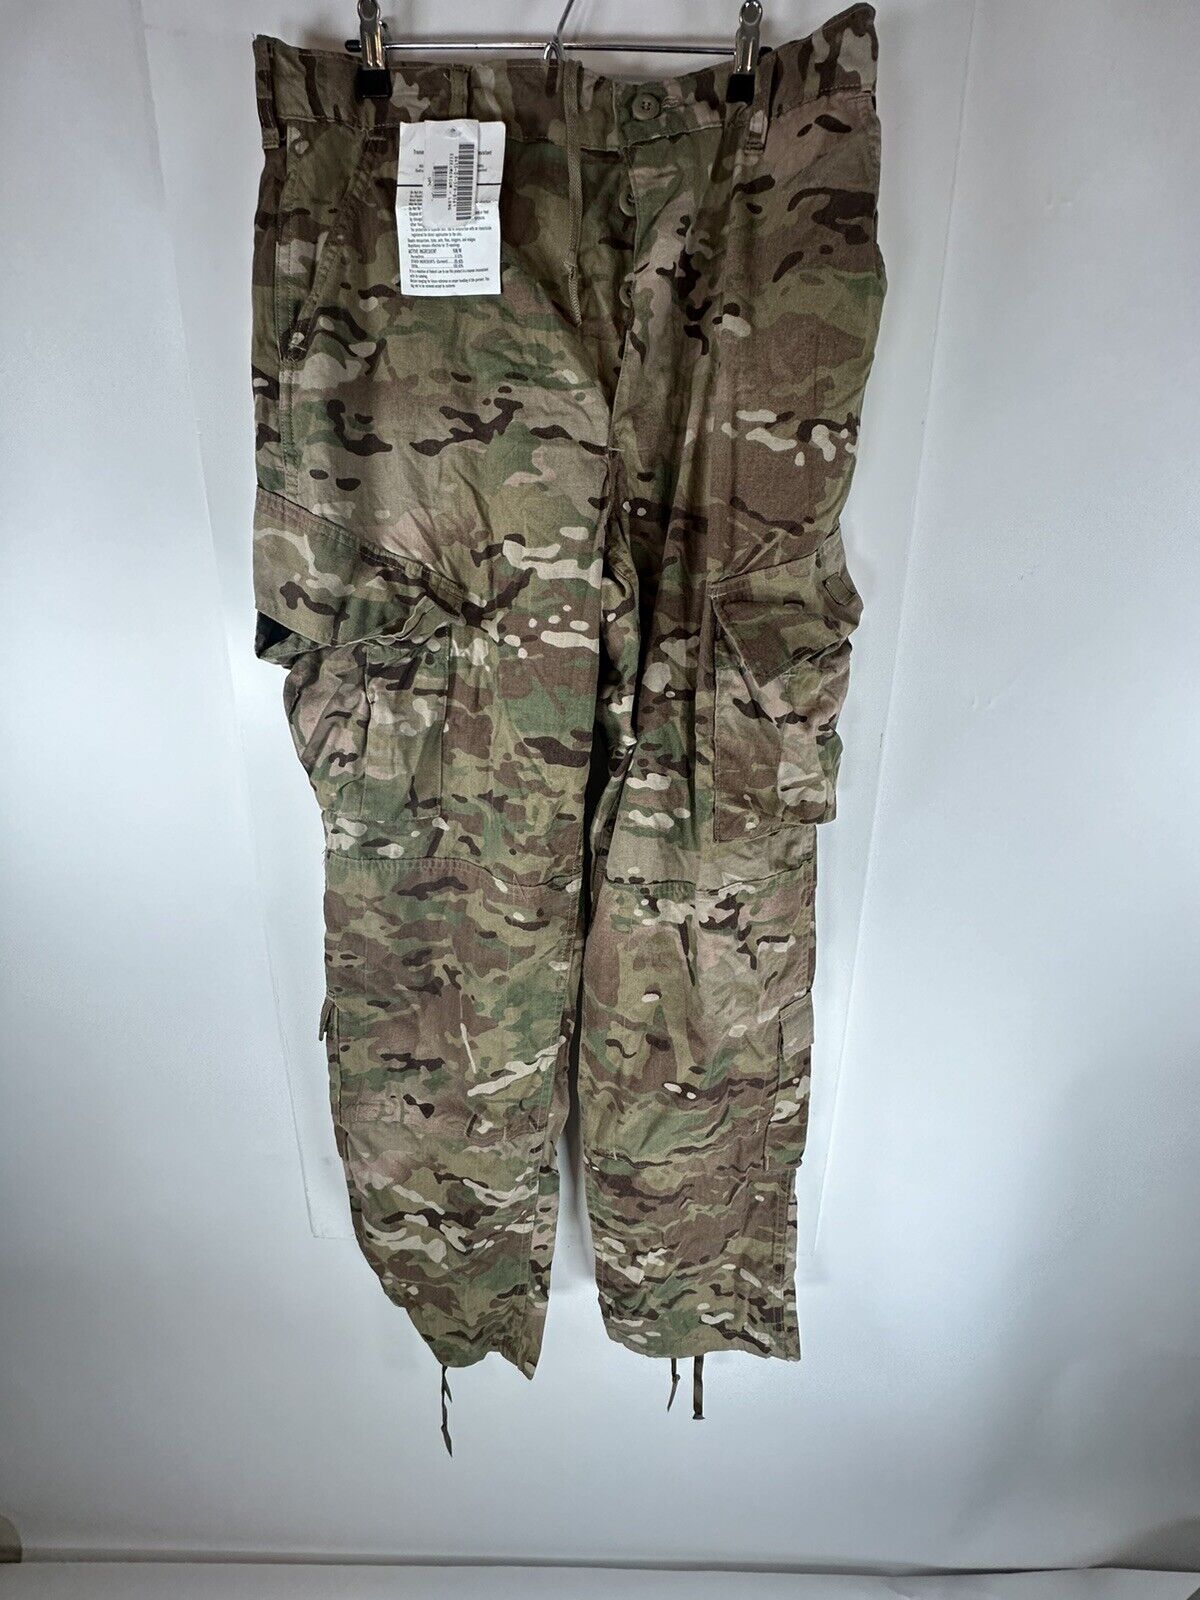 NEW Army Issue Combat Trousers Pants Camo Size Medium Long